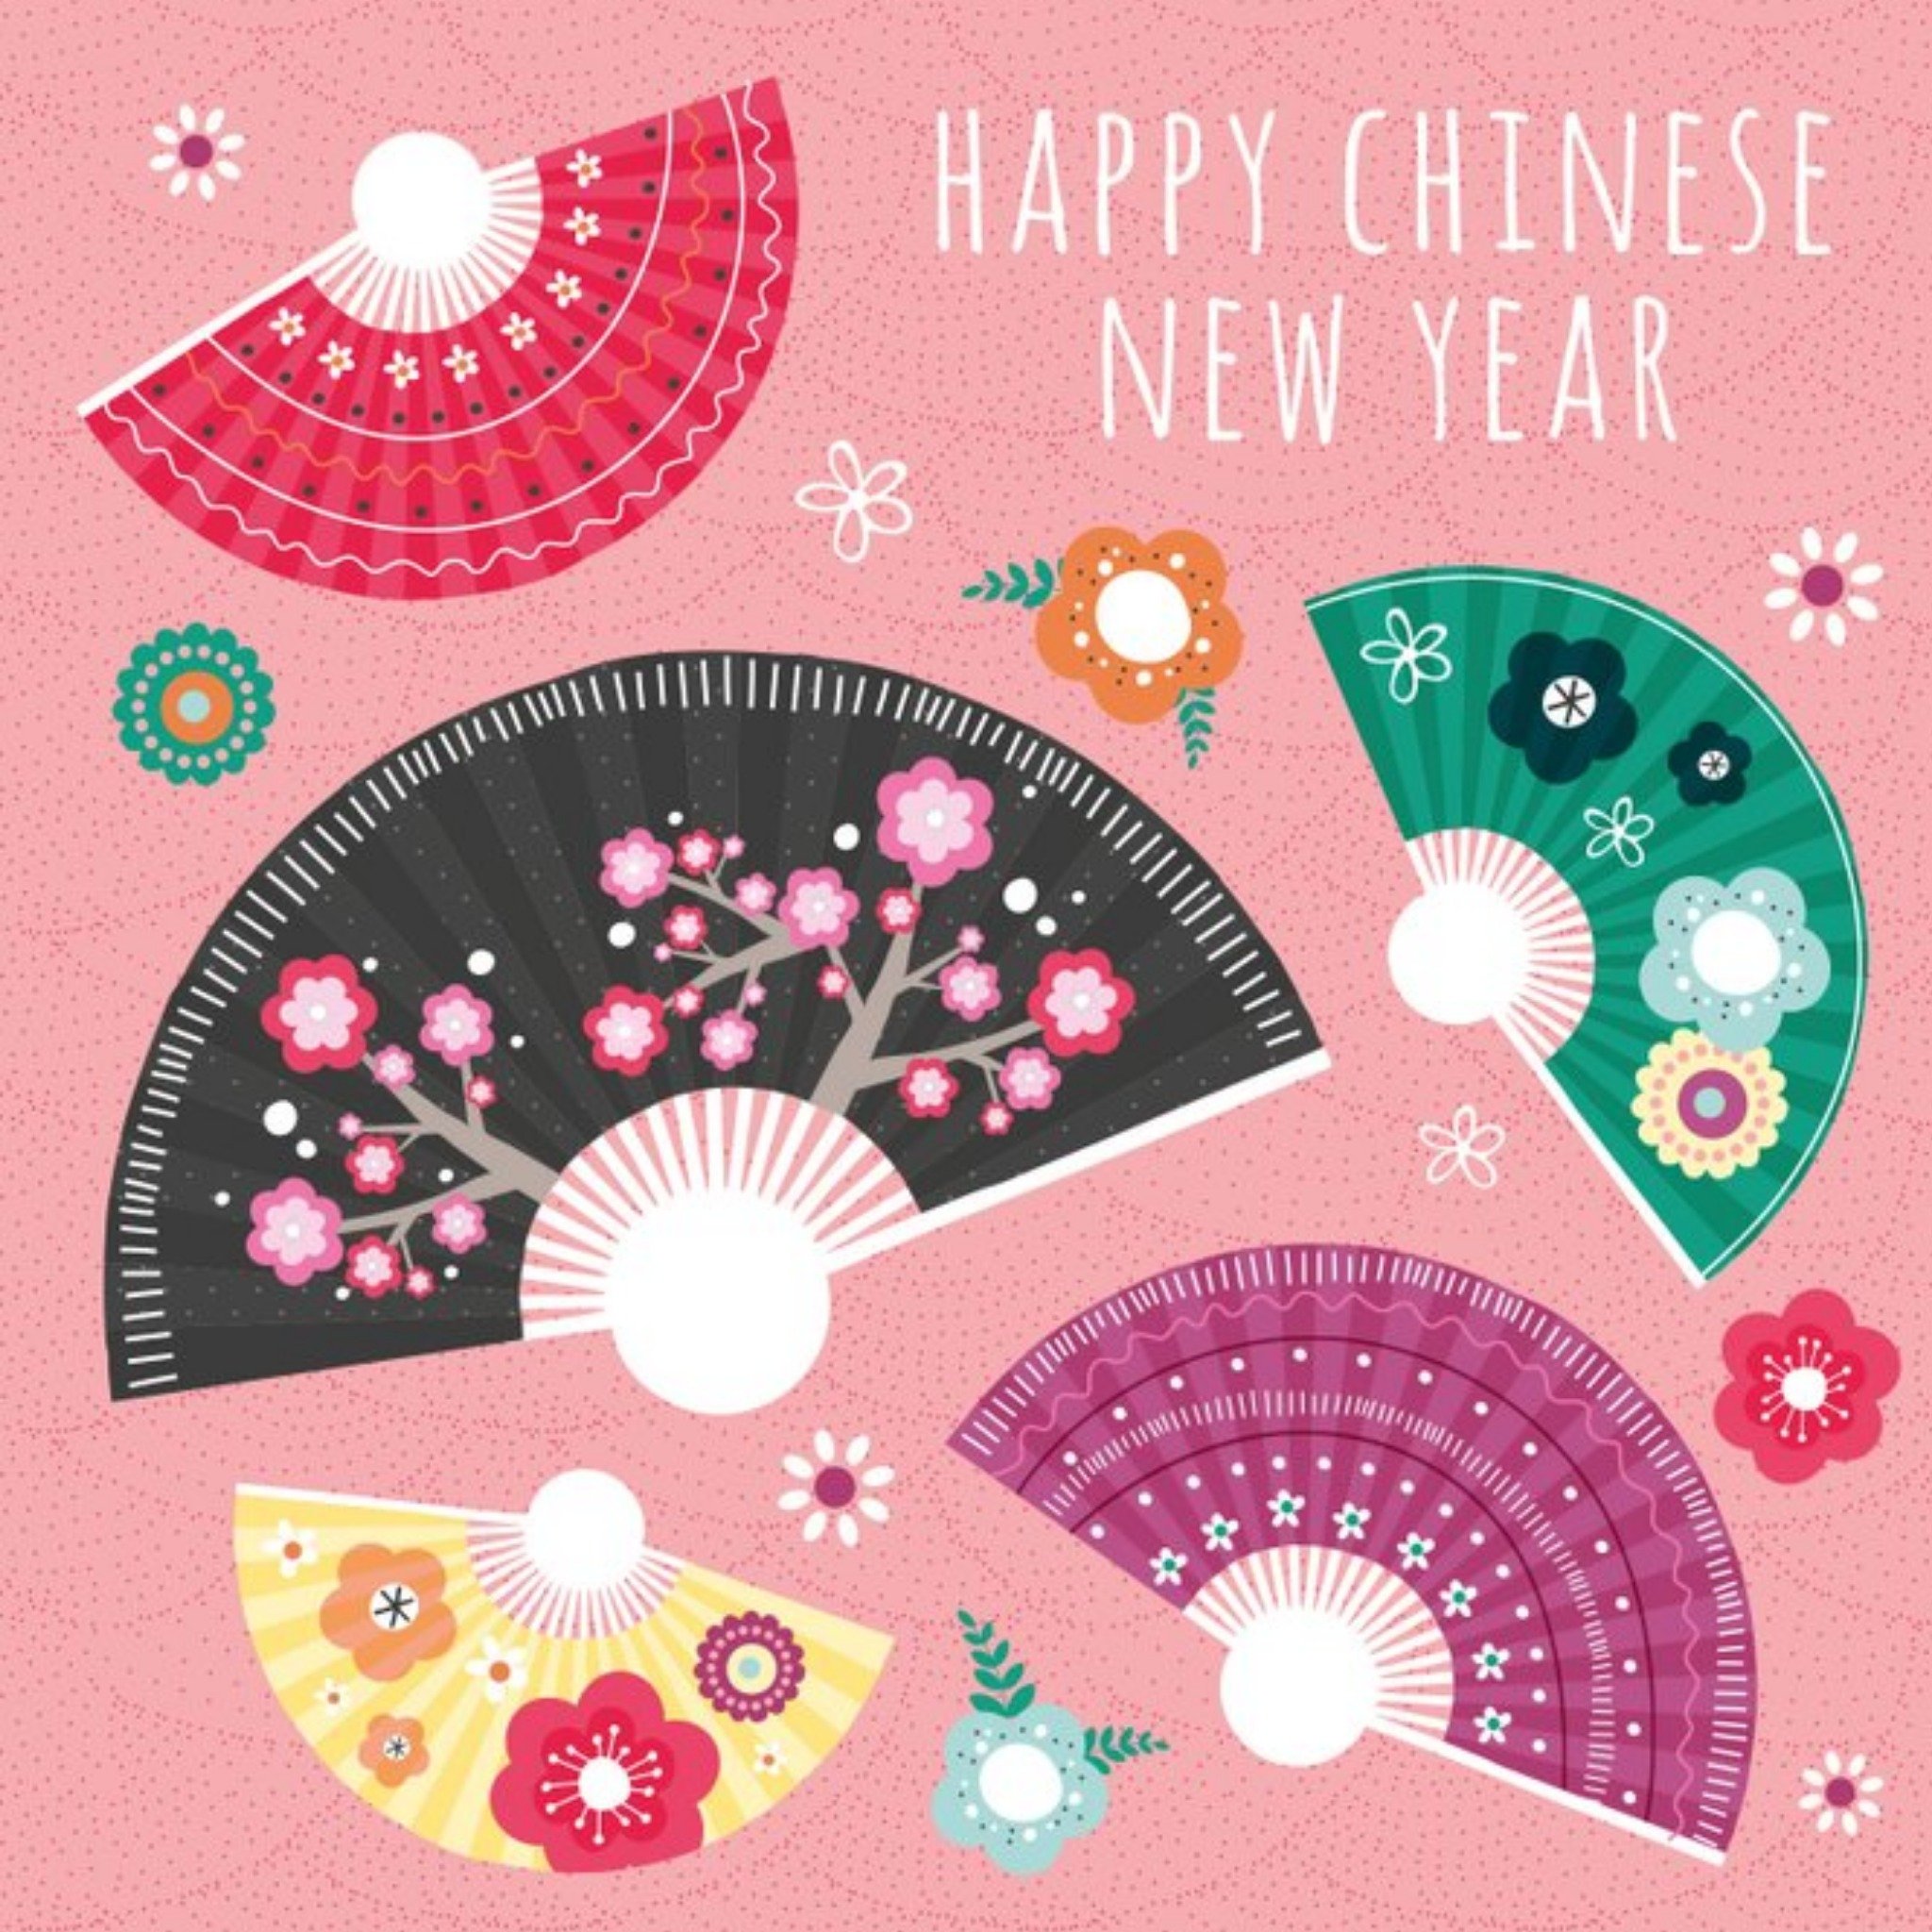 Moonpig Fans 2021 Happy Chinese New Year Card, Square